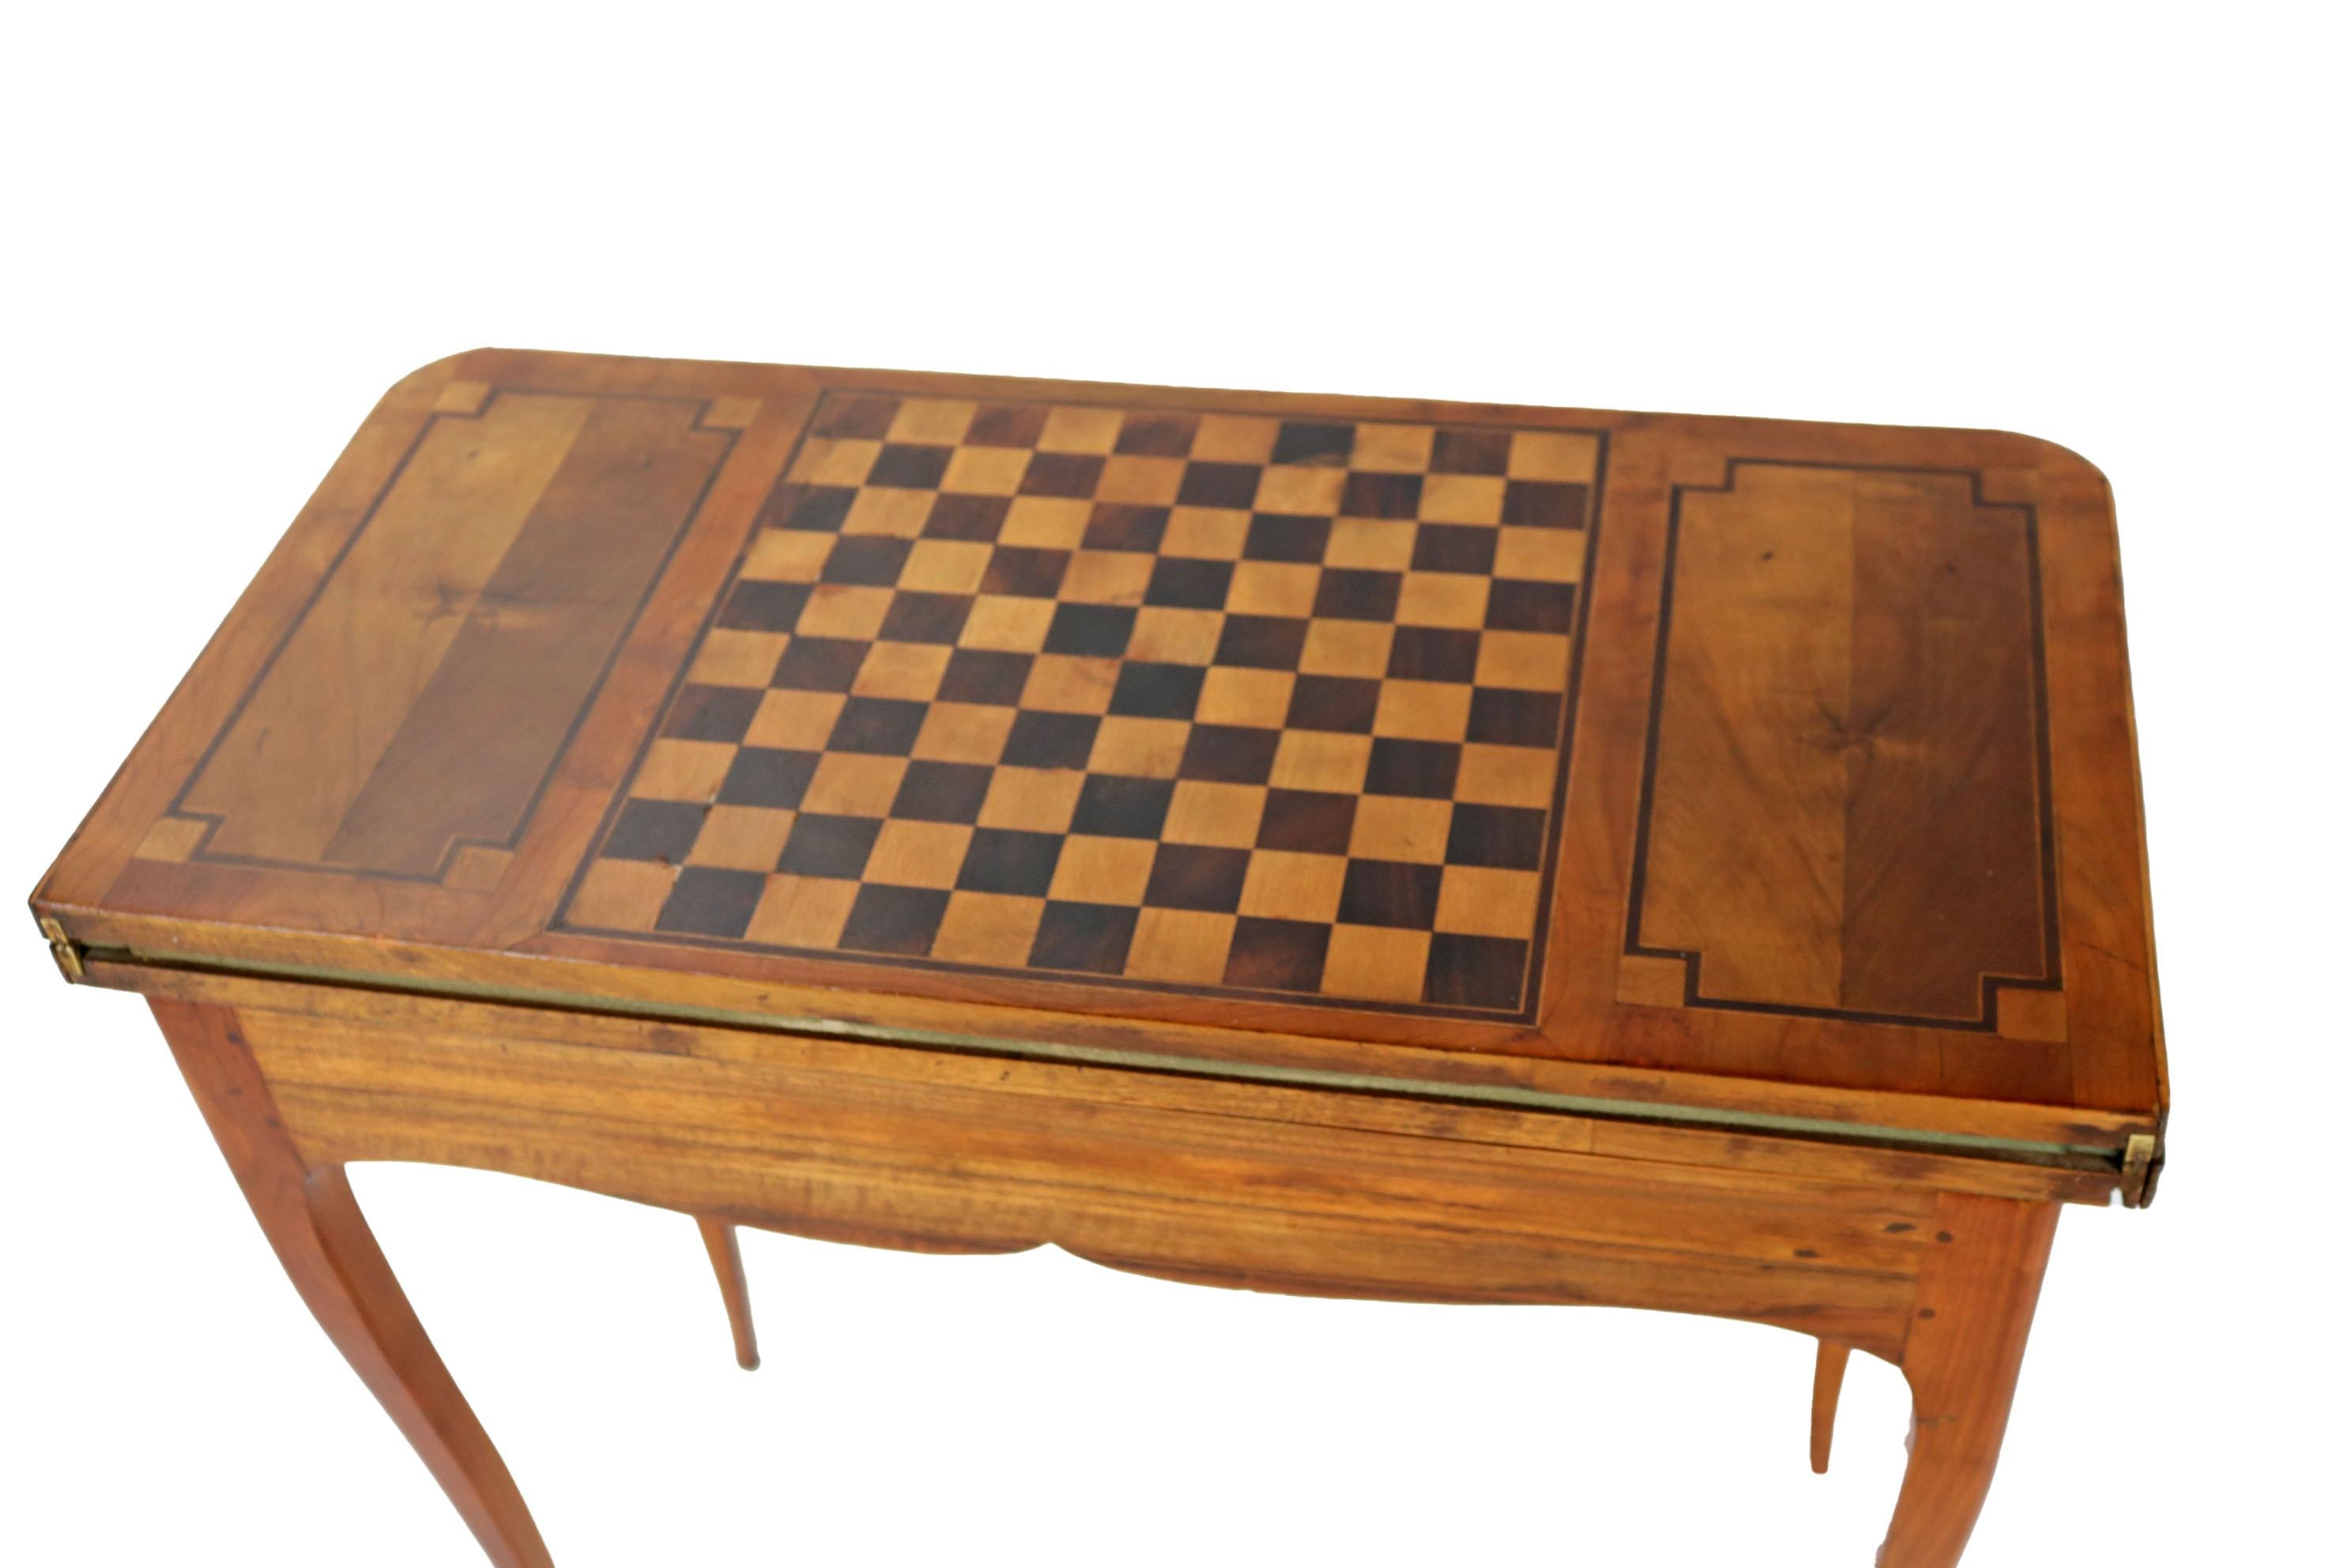 Polished Early 19th Century Cherry And Walnut Card Table For Sale